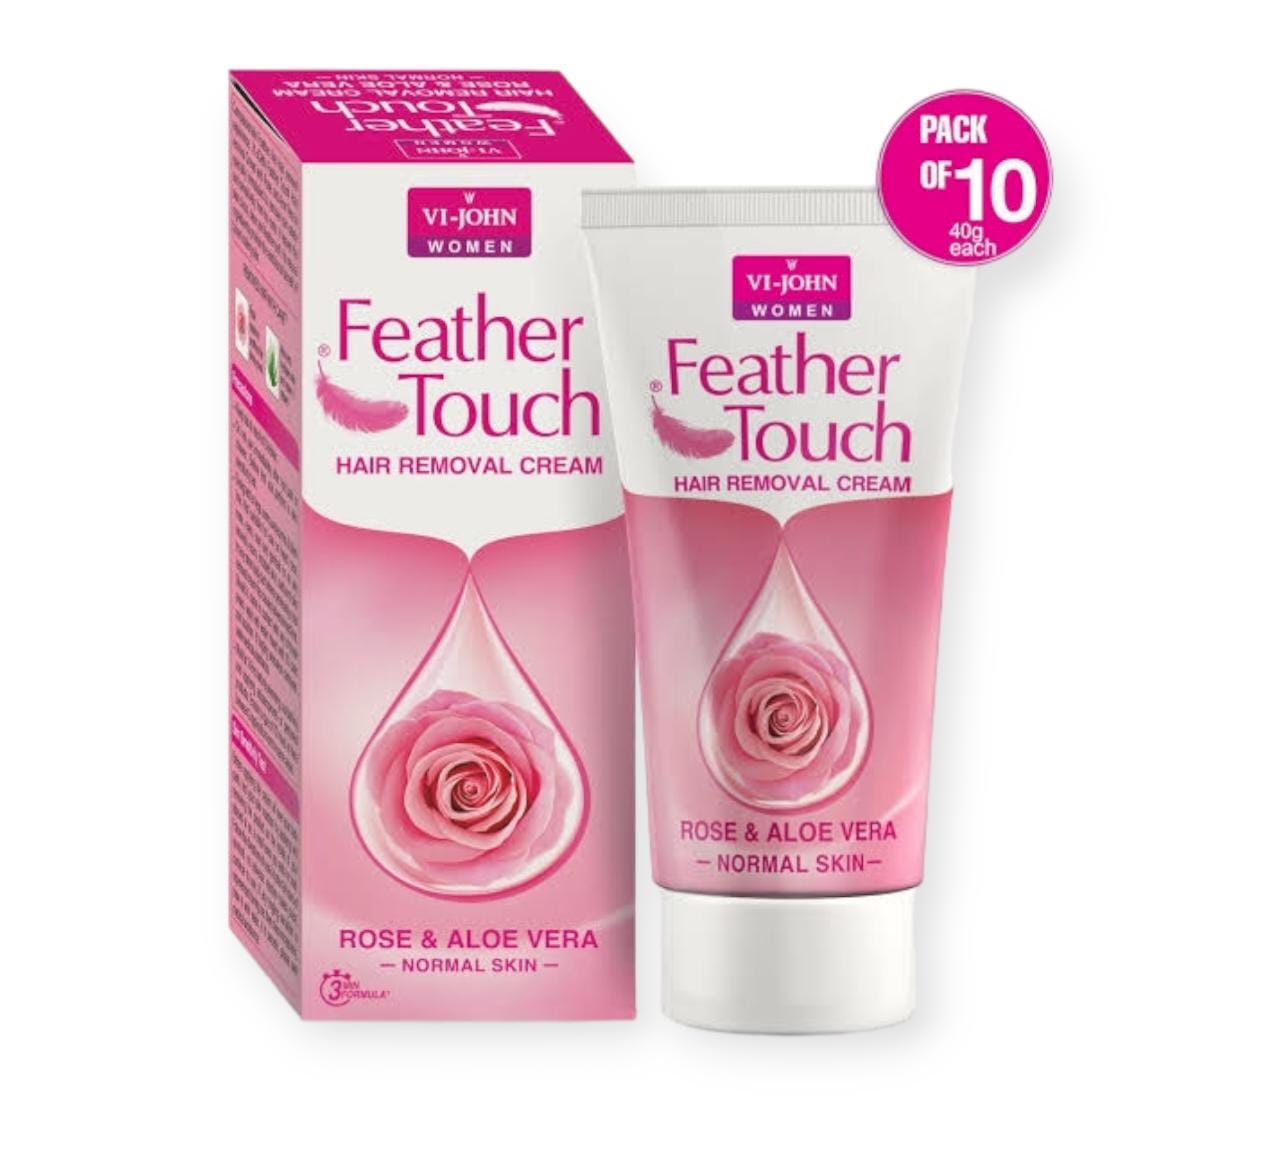 Feather touch hair removal cream